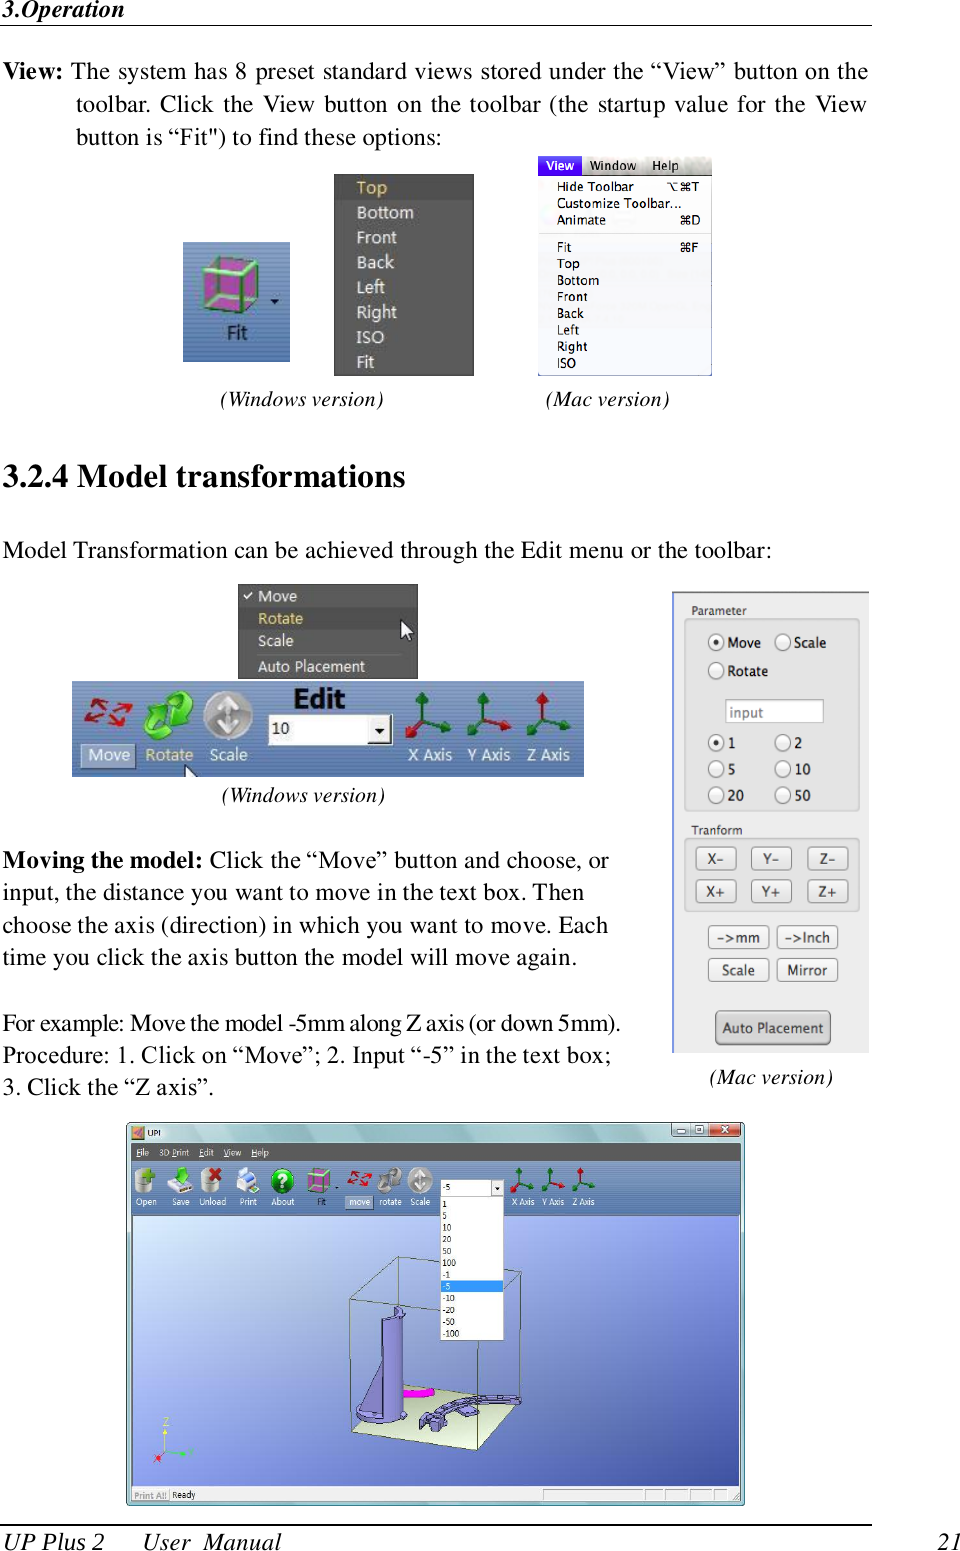 3.Operation UP Plus 2      User  Manual                                21 View: The system has 8 preset standard views stored under the ―View‖ button on the toolbar. Click the View button on the toolbar (the startup value for the View button is ―Fit&quot;) to find these options:               3.2.4 Model transformations Model Transformation can be achieved through the Edit menu or the toolbar:     (Windows version)  Moving the model: Click the ―Move‖ button and choose, or input, the distance you want to move in the text box. Then choose the axis (direction) in which you want to move. Each time you click the axis button the model will move again.  For example: Move the model -5mm along Z axis (or down 5mm).   Procedure: 1. Click on ―Move‖; 2. Input ―-5‖ in the text box; 3. Click the ―Z axis‖.  (Windows version) (Mac version) (Mac version) 